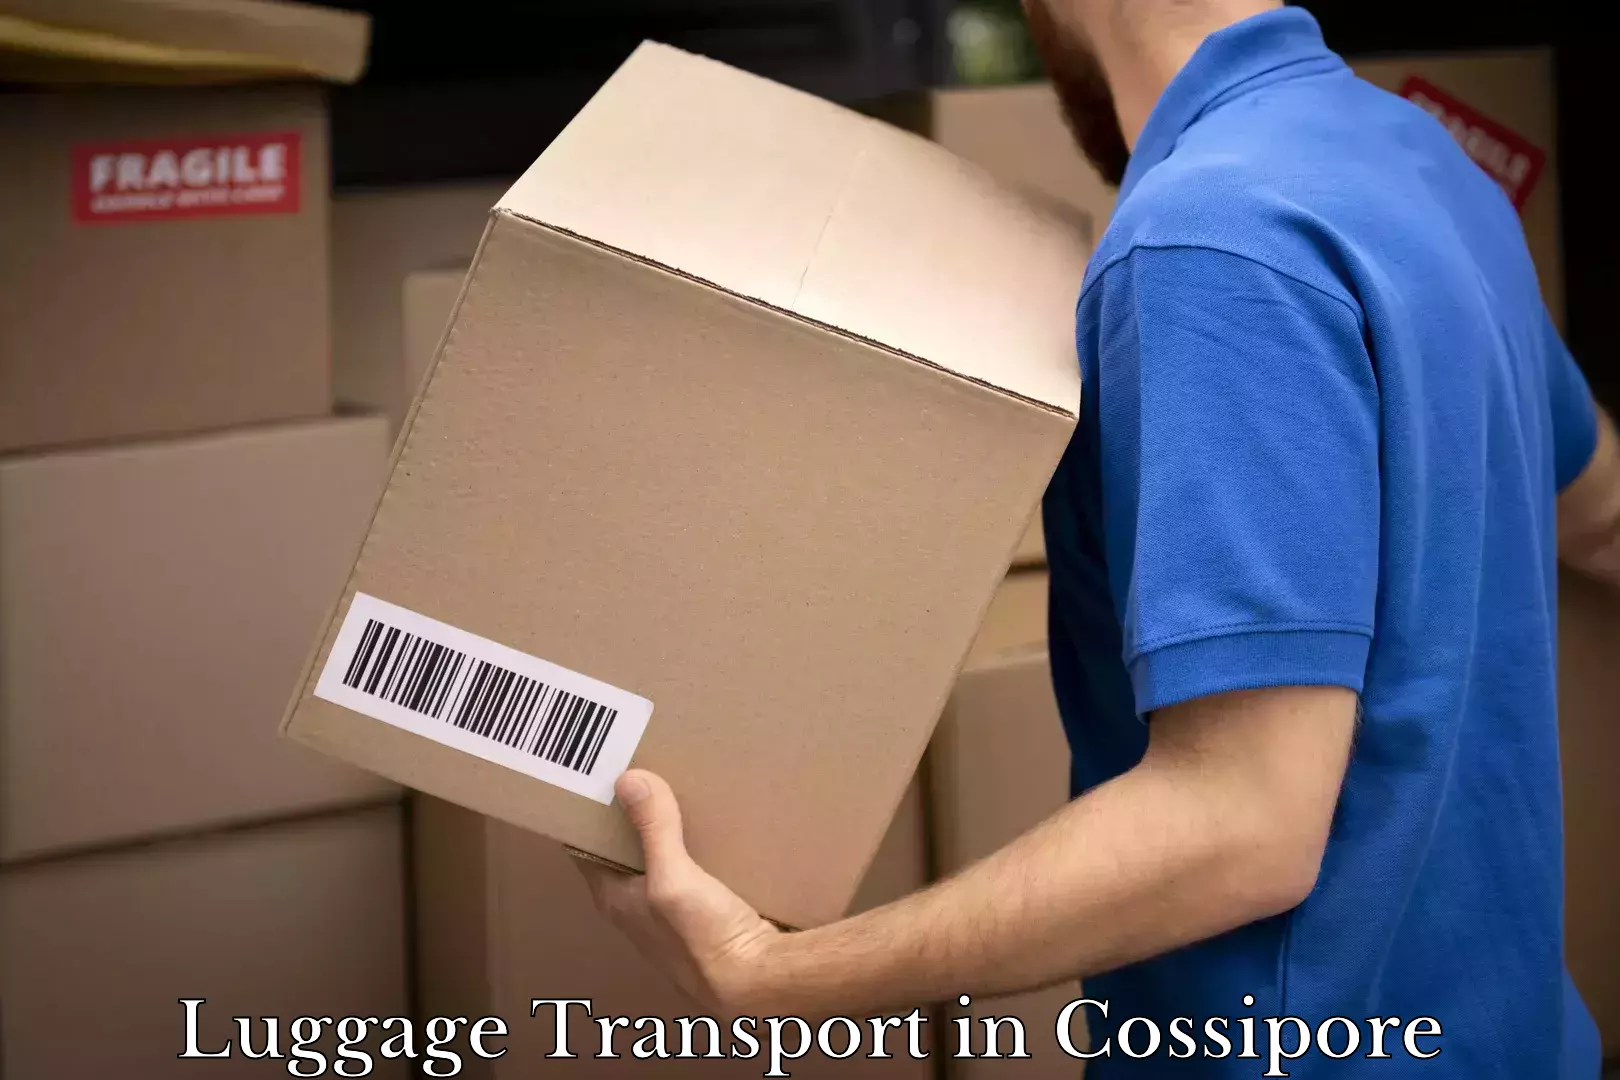 Luggage shipment tracking in Cossipore